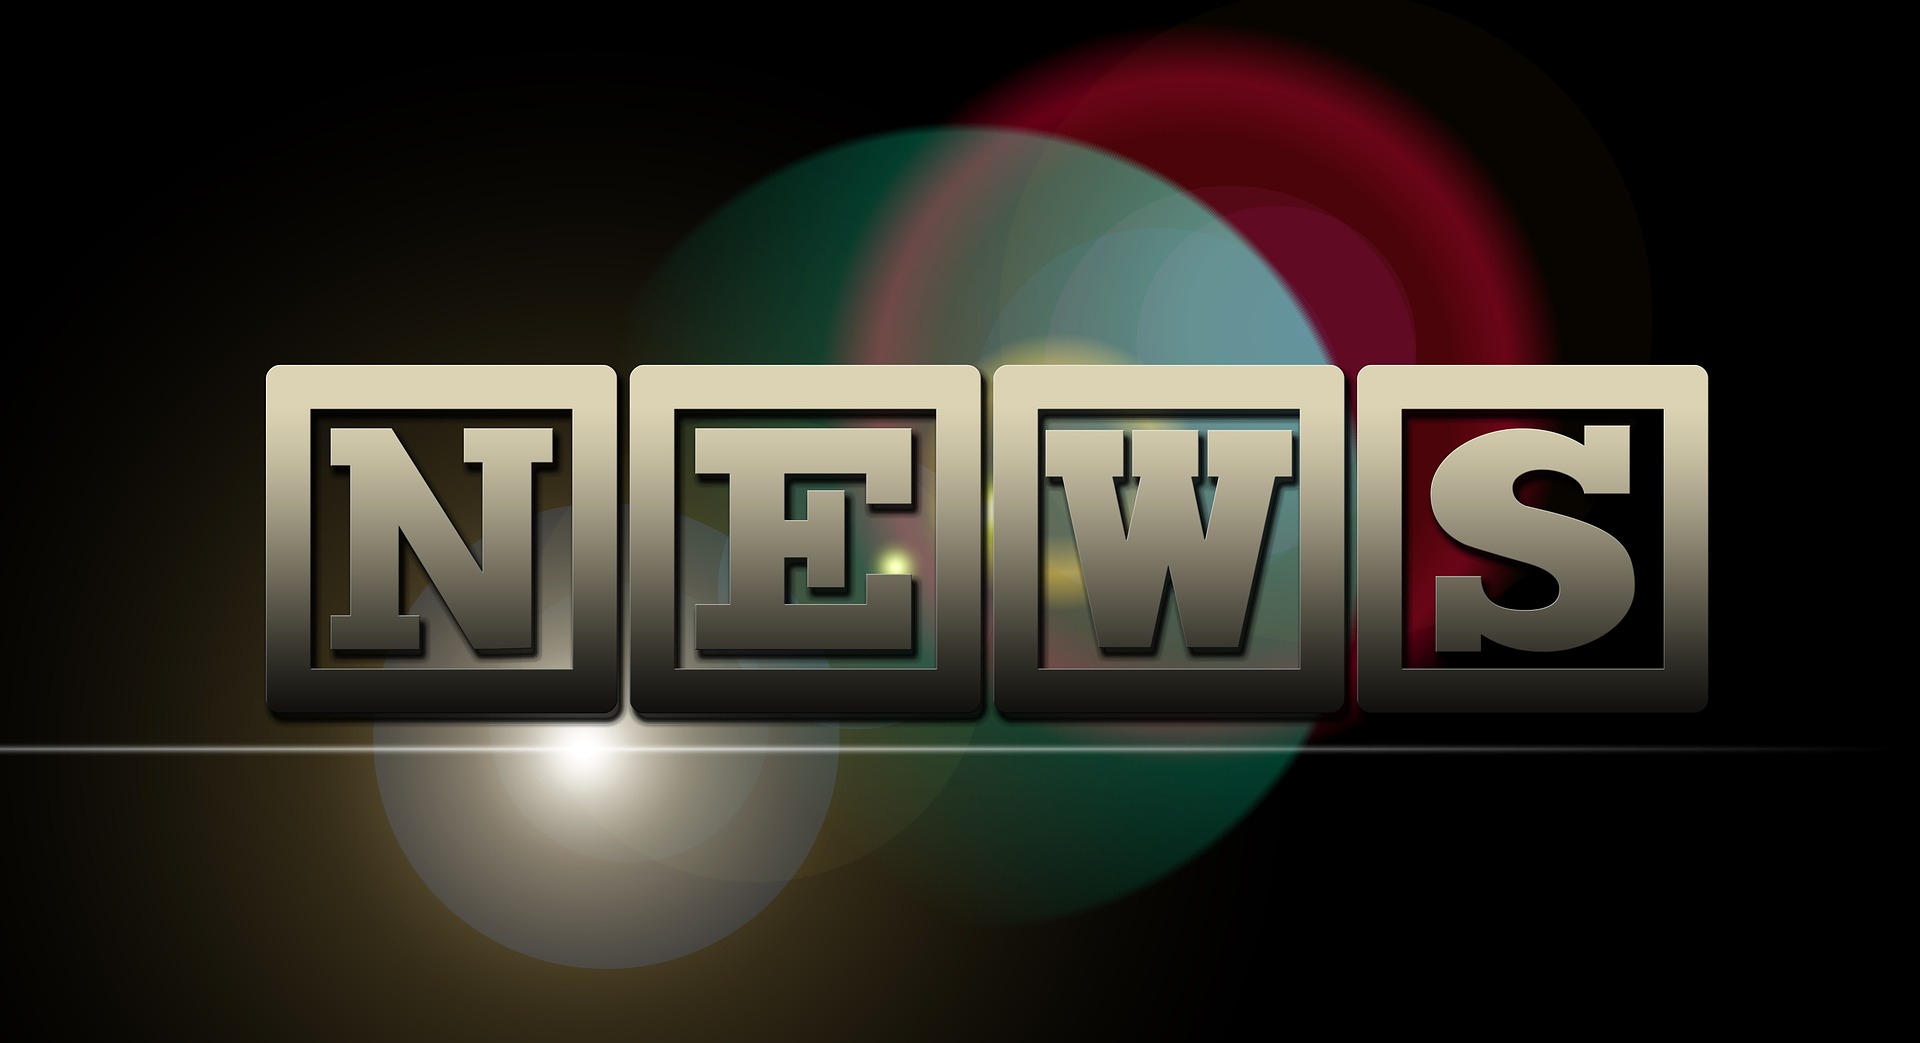 Graphic of block letters spelling out "news".